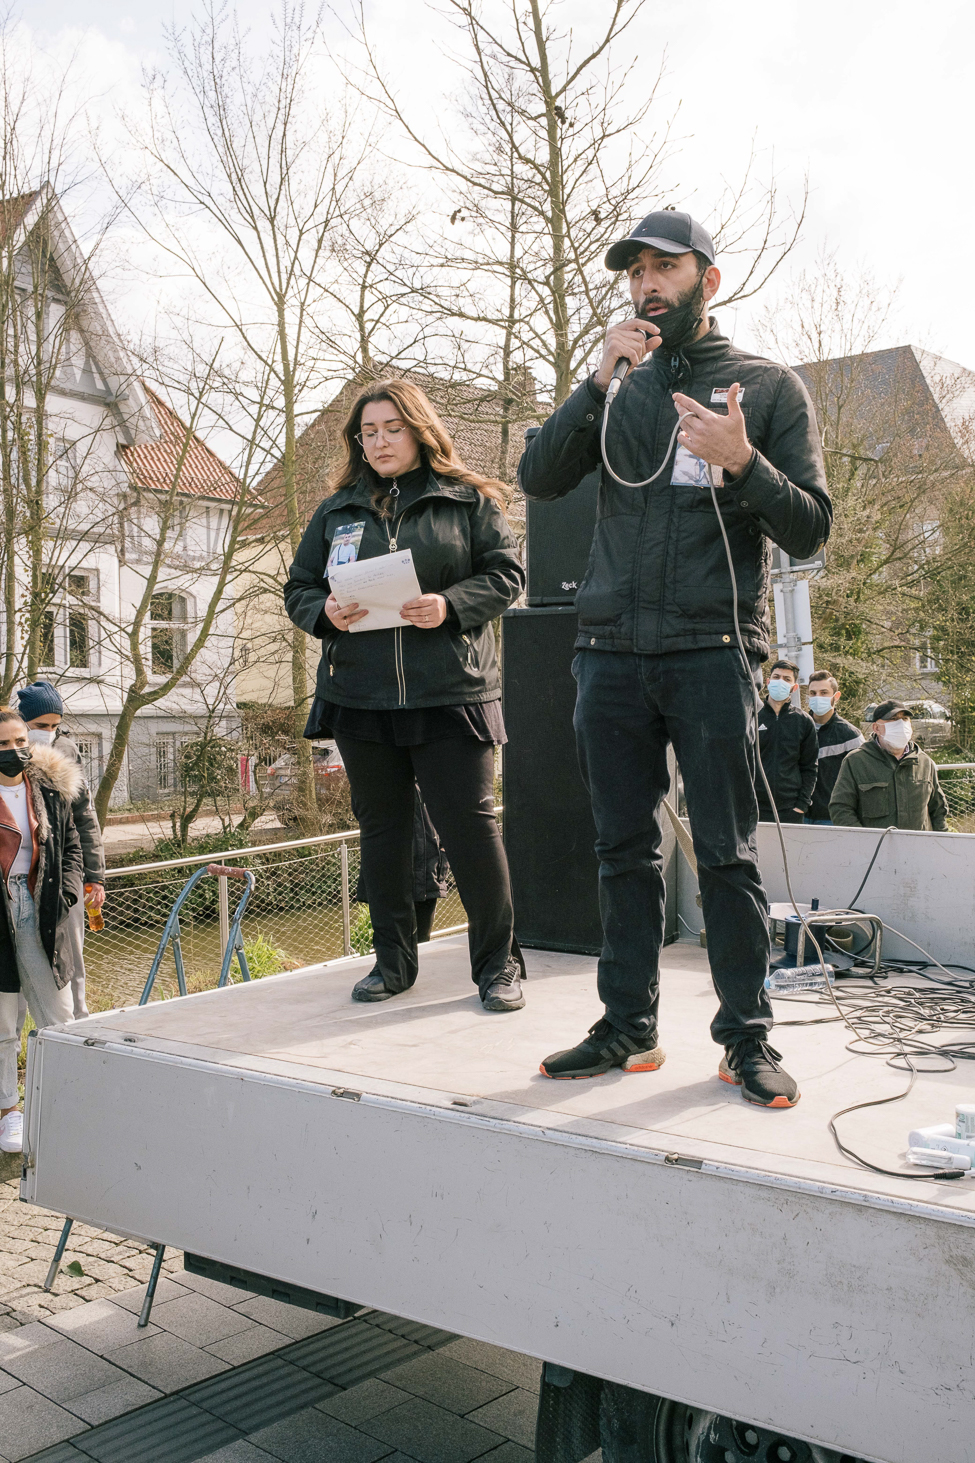 Barsan Mehdi, the cousin of Qosay Khalaf speaks on the slow investigations and questions that are to be answered by police at a rally in Delmenhorst. April 3rd, 2021, Delmenhorst 